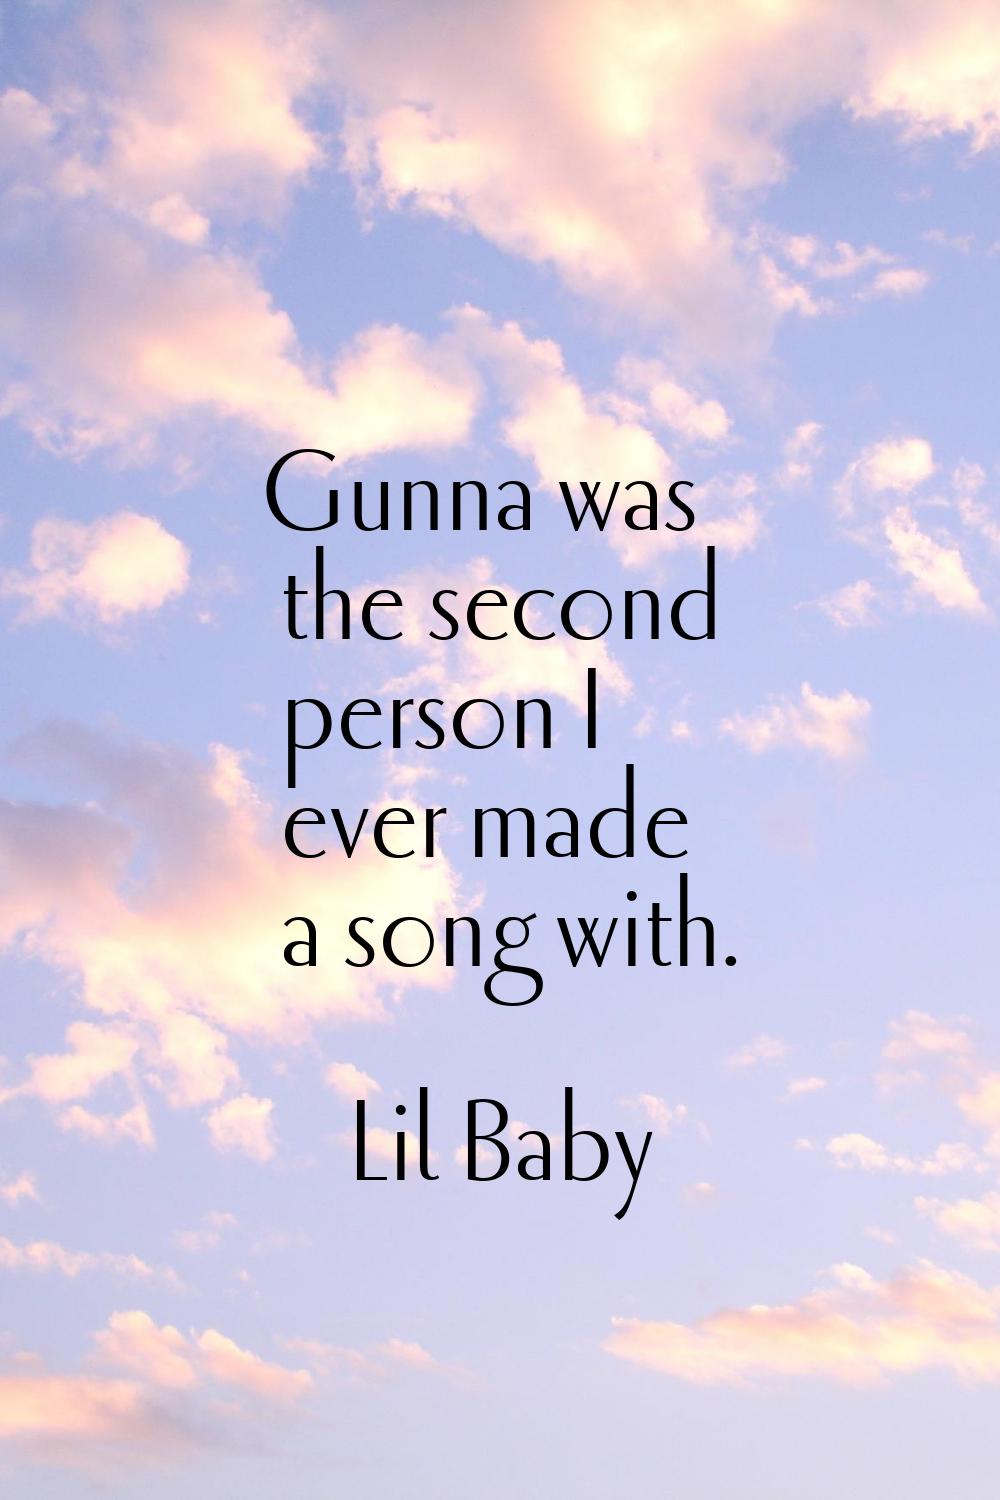 Gunna was the second person I ever made a song with.